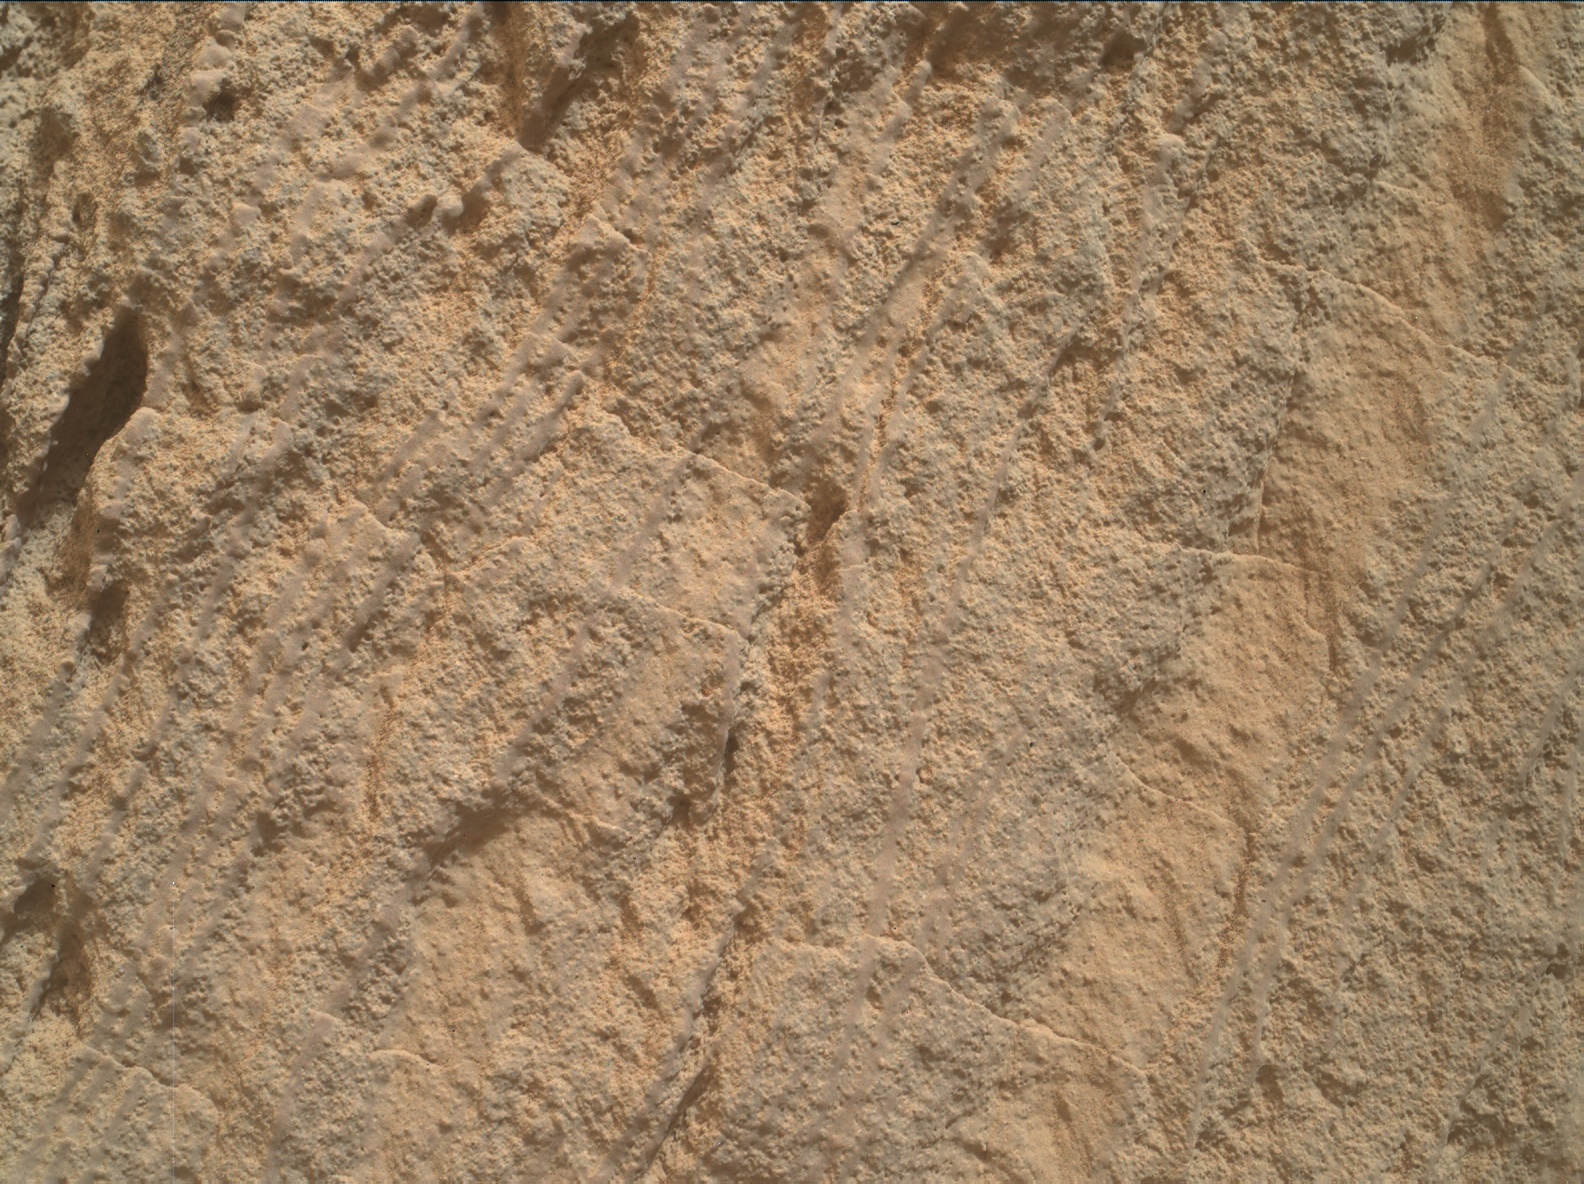 Nasa's Mars rover Curiosity acquired this image using its Mars Hand Lens Imager (MAHLI) on Sol 3374